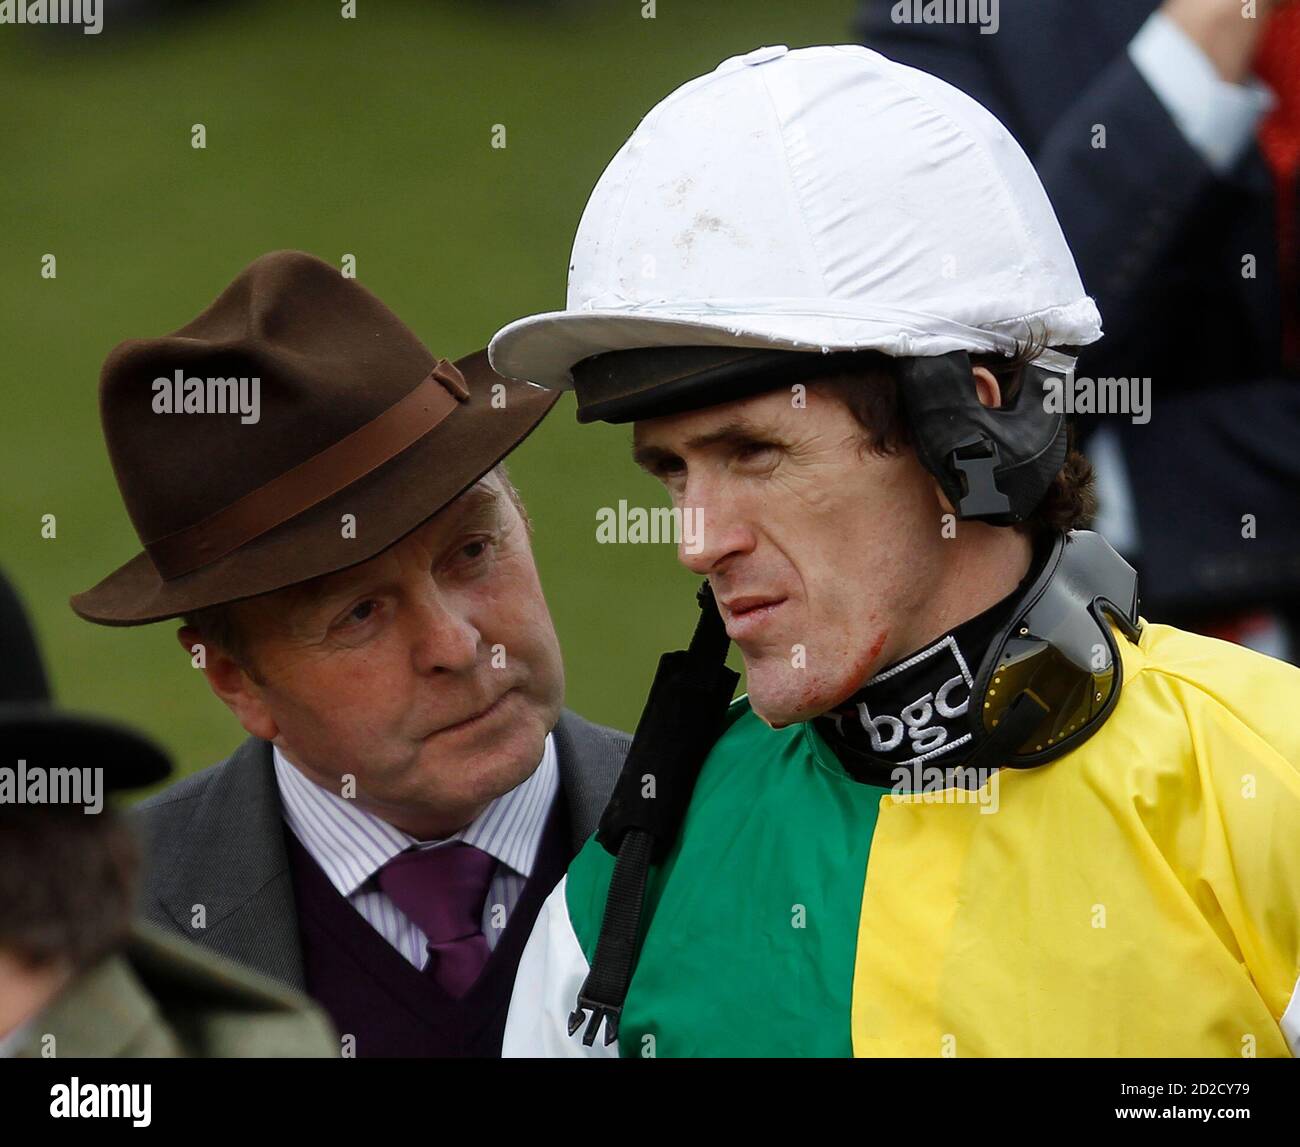 Jockey Tony McCoy (R) talks to racehorse trainer Jonjo O'Neill during The Cheltenham Festival horse racing meet in Gloucestershire, western England March 18, 2010.   REUTERS/ Eddie Keogh (BRITAIN - Tags: SPORT HORSE RACING) Stock Photo